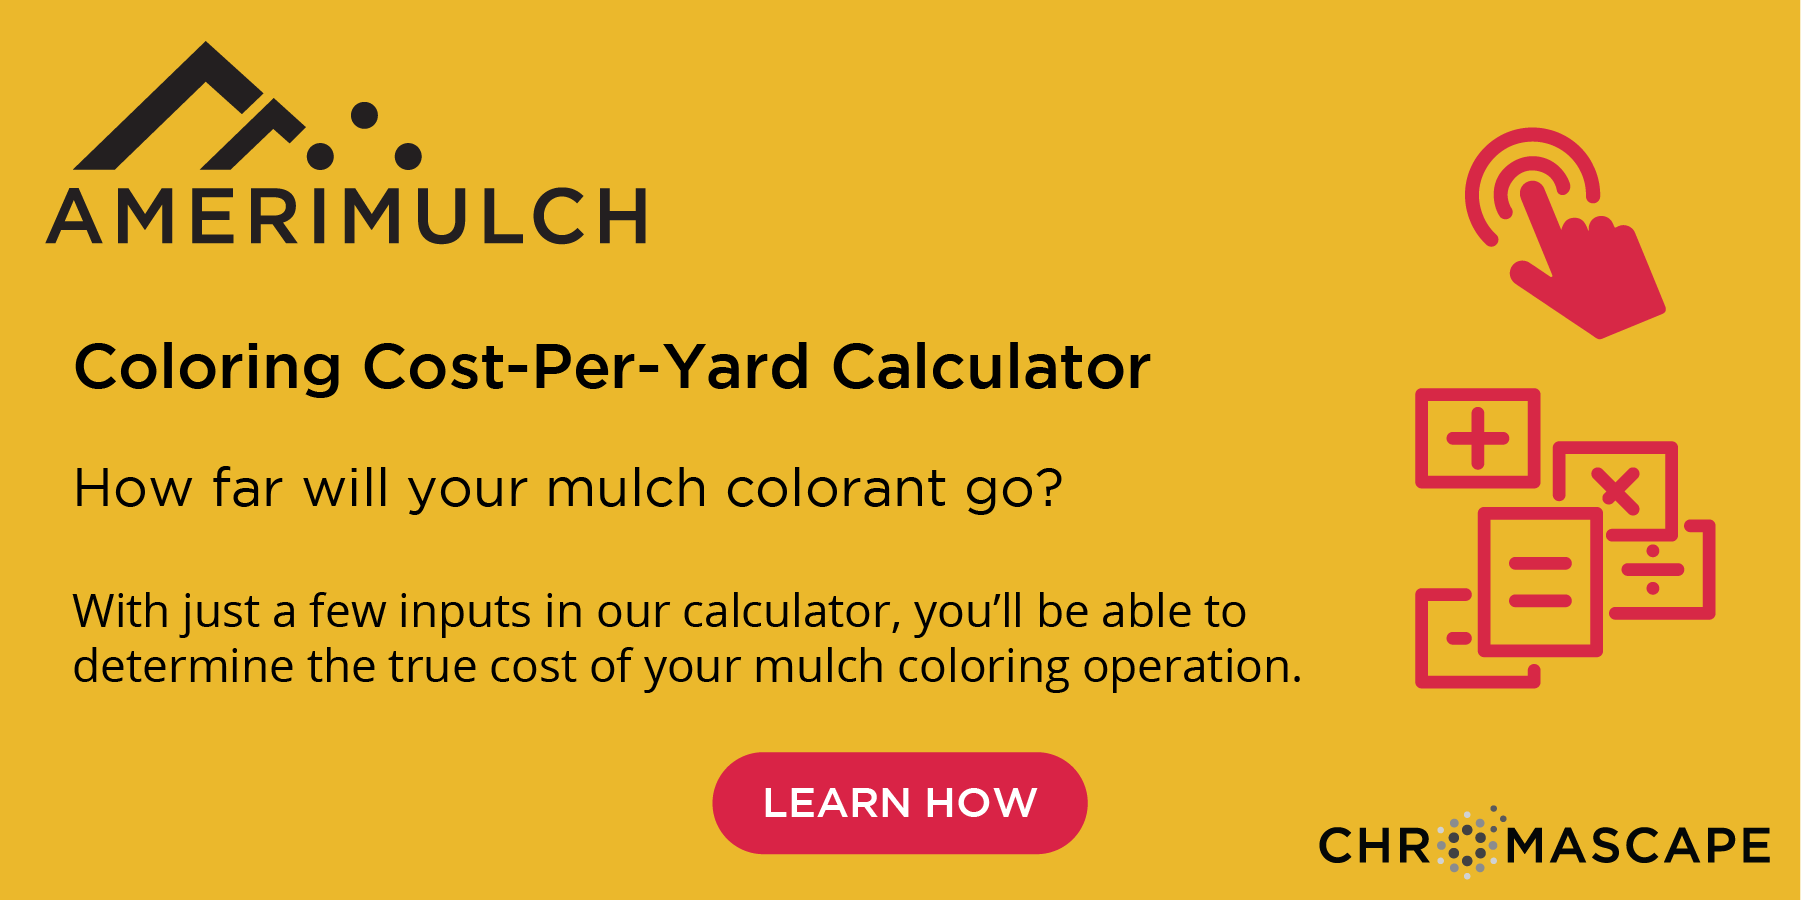 Calculating your labor and loader cost and why it matters